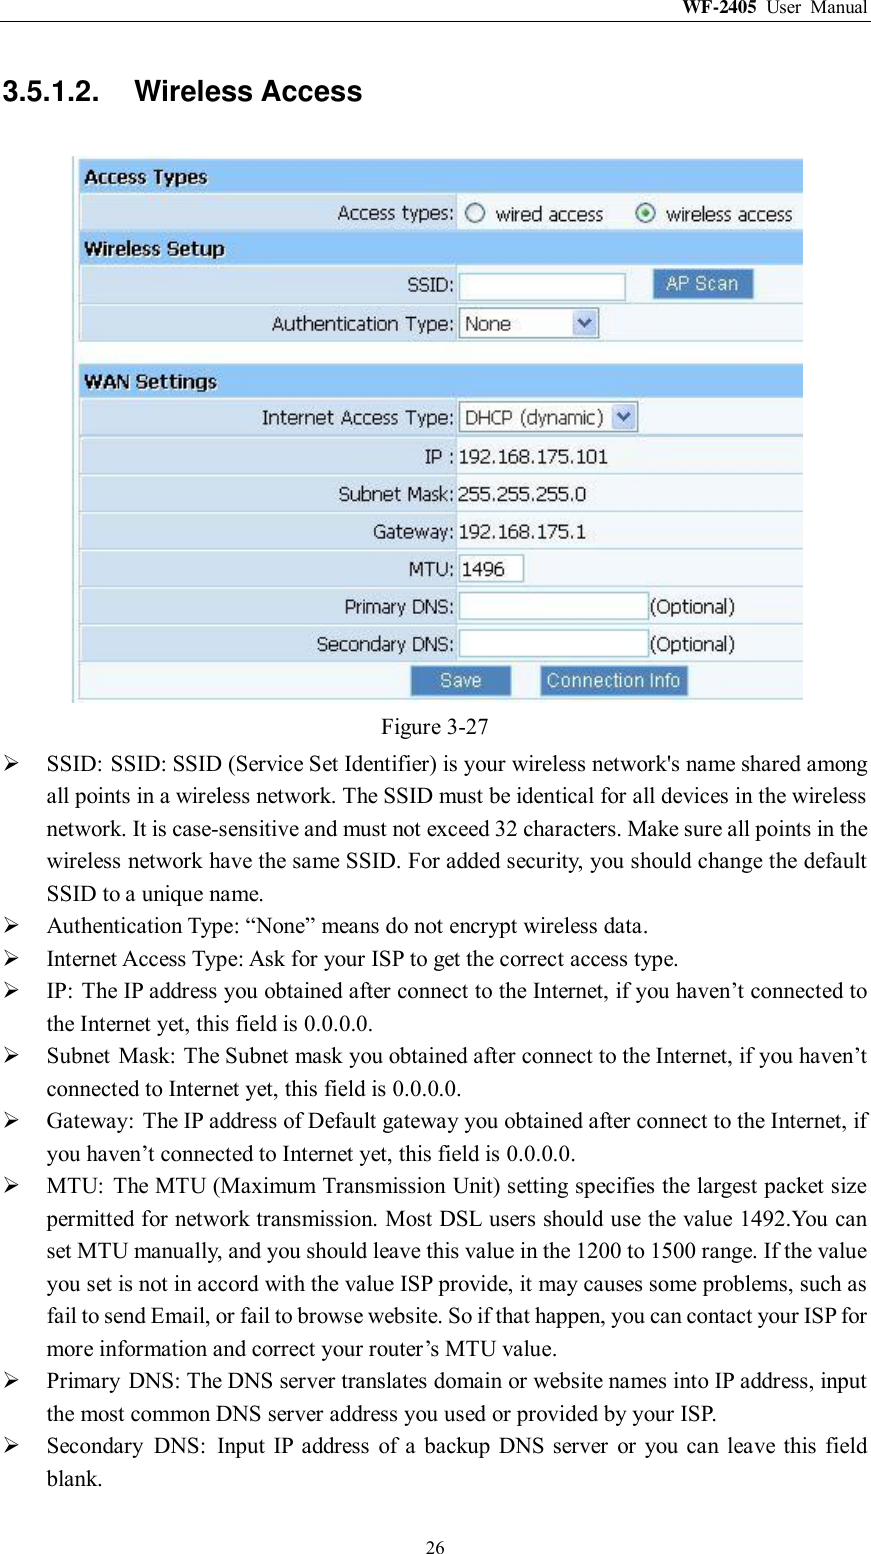 WF-2405  User  Manual  26 3.5.1.2.  Wireless Access  Figure 3-27  SSID: SSID: SSID (Service Set Identifier) is your wireless network&apos;s name shared among all points in a wireless network. The SSID must be identical for all devices in the wireless network. It is case-sensitive and must not exceed 32 characters. Make sure all points in the wireless network have the same SSID. For added security, you should change the default SSID to a unique name.  Authentication Type: “None” means do not encrypt wireless data.  Internet Access Type: Ask for your ISP to get the correct access type.  IP:  The IP address you obtained after connect to the Internet, if you haven‟t connected to the Internet yet, this field is 0.0.0.0.  Subnet  Mask: The Subnet mask you obtained after connect to the Internet, if you haven‟t connected to Internet yet, this field is 0.0.0.0.  Gateway:  The IP address of Default gateway you obtained after connect to the Internet, if you haven‟t connected to Internet yet, this field is 0.0.0.0.  MTU:  The MTU (Maximum Transmission Unit) setting specifies the largest packet size permitted for network transmission. Most DSL users should use the value 1492.You can set MTU manually, and you should leave this value in the 1200 to 1500 range. If the value you set is not in accord with the value ISP provide, it may causes some problems, such as fail to send Email, or fail to browse website. So if that happen, you can contact your ISP for more information and correct your router‟s MTU value.  Primary  DNS: The DNS server translates domain or website names into IP address, input the most common DNS server address you used or provided by your ISP.  Secondary  DNS:  Input IP  address  of  a  backup DNS server  or  you can  leave this field blank. 